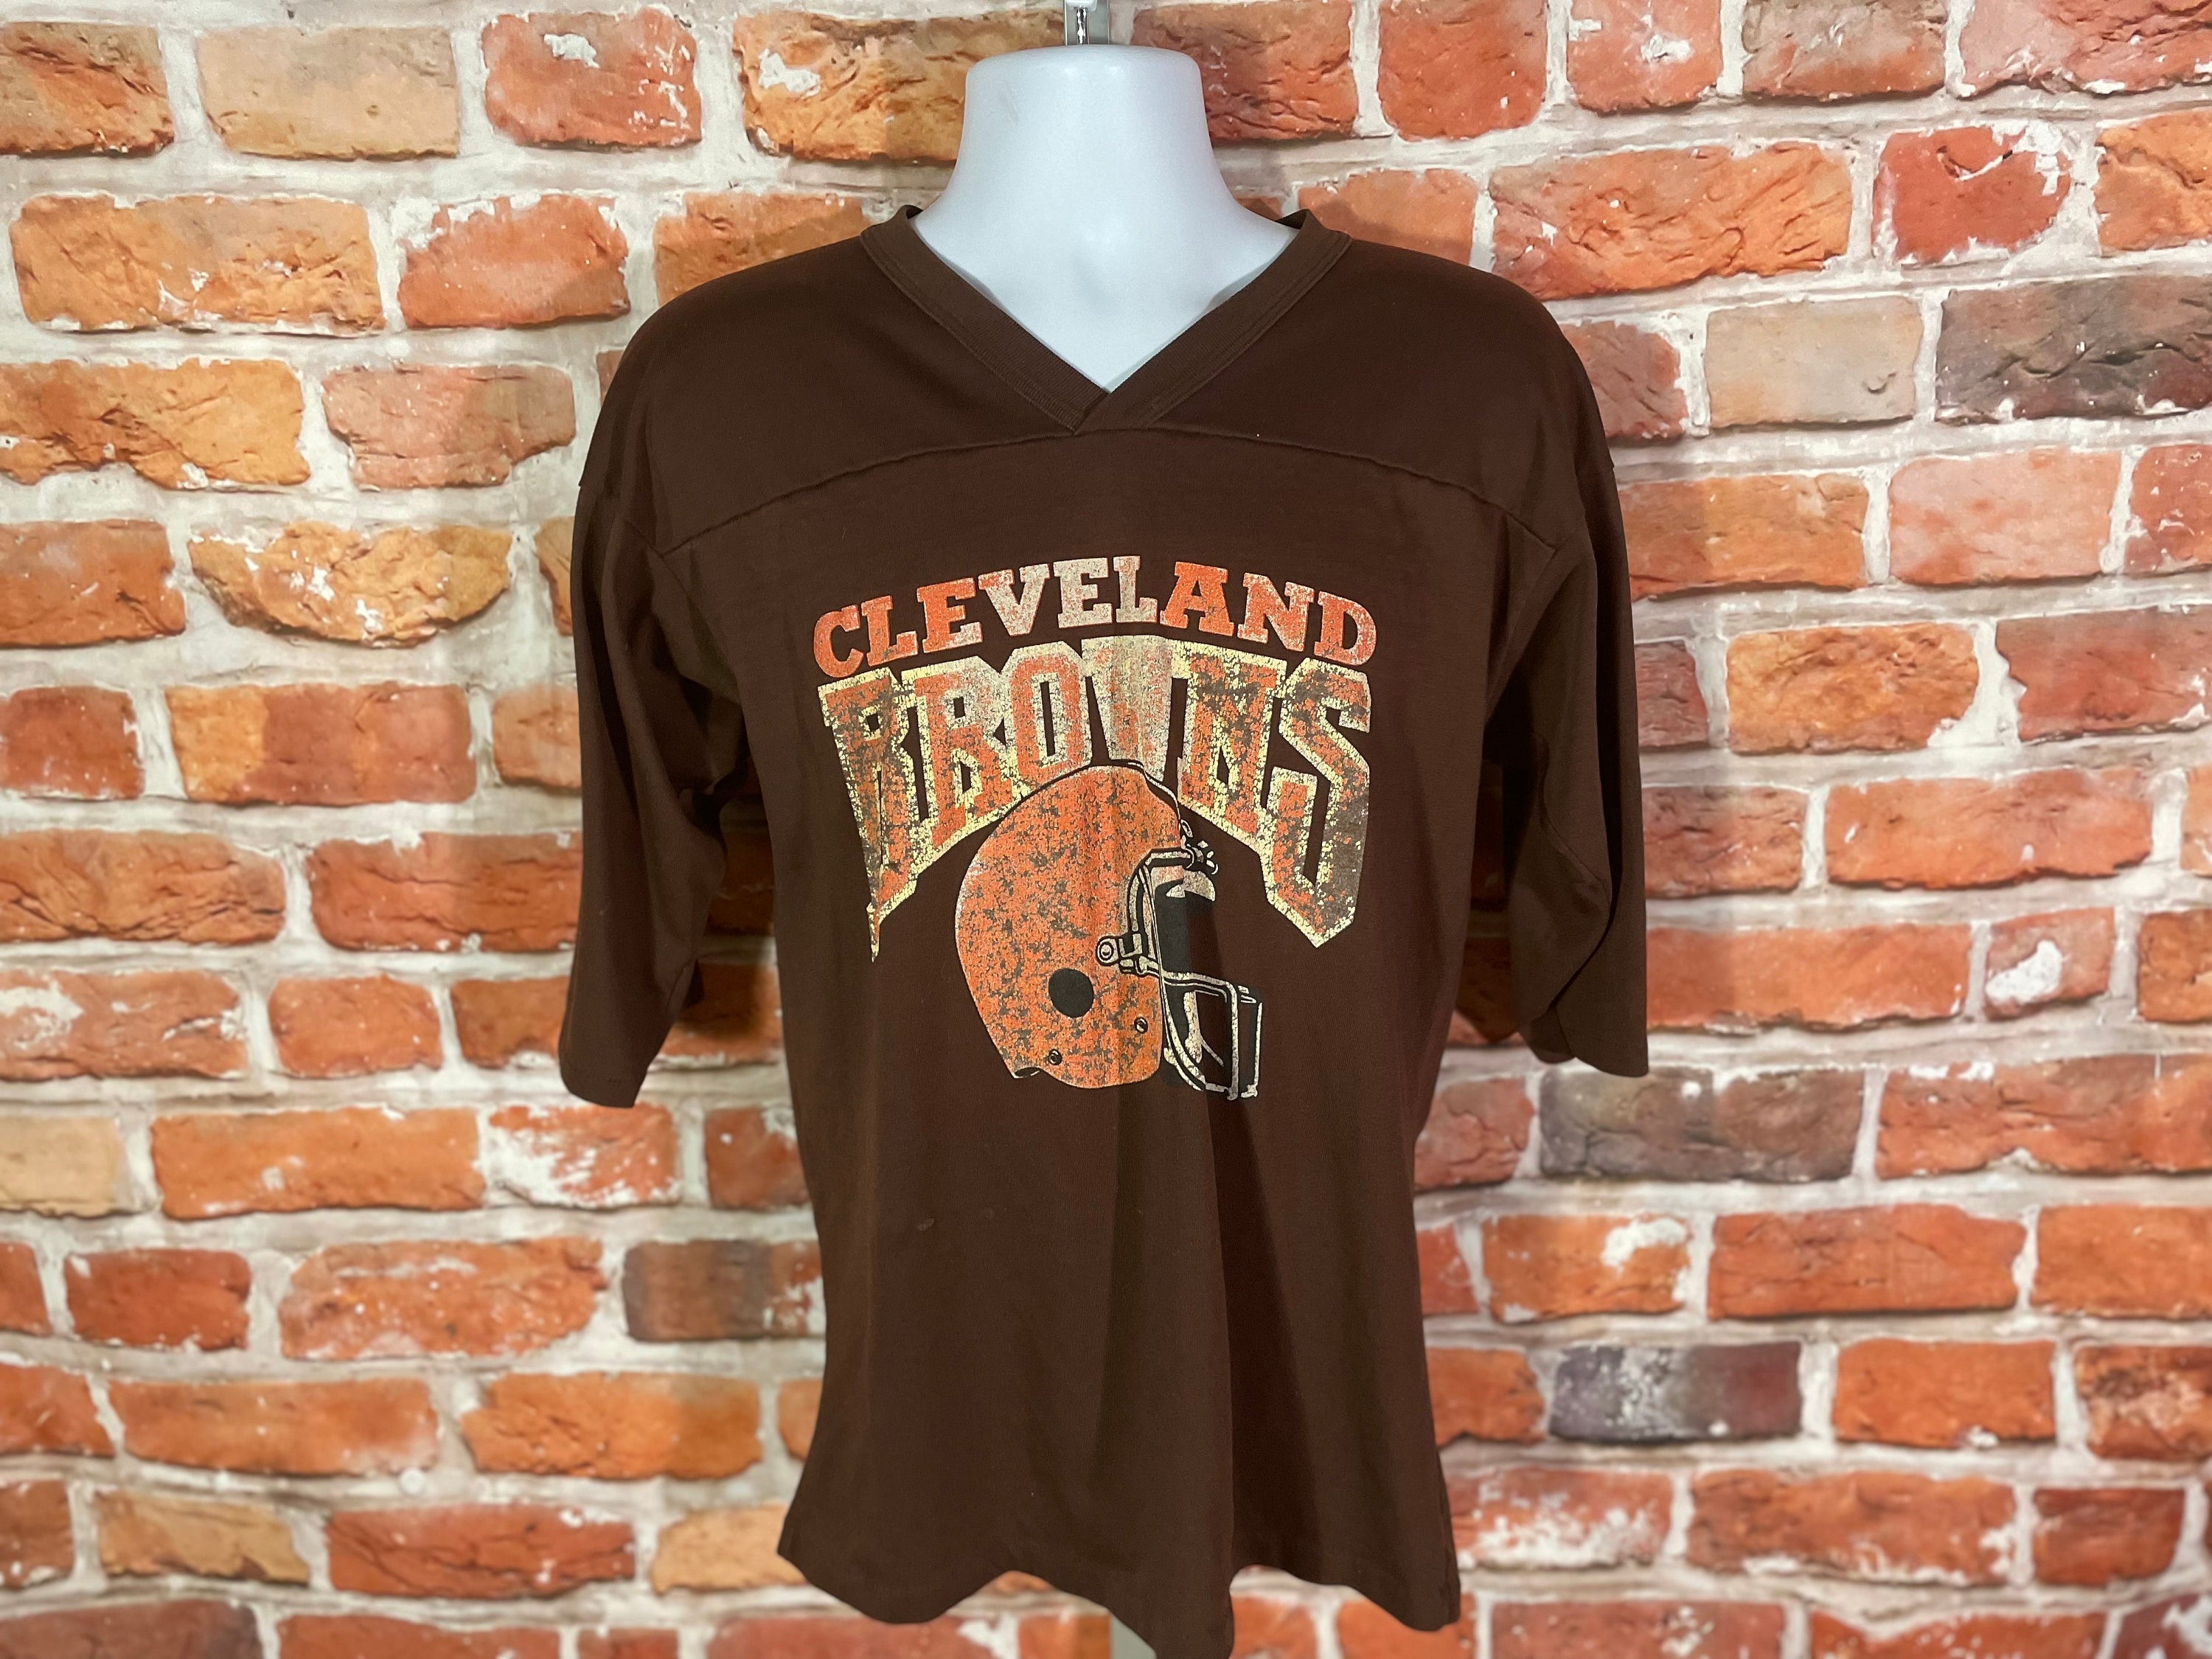 Distressed 80s Cleveland Browns Jersey Shirt Fits M/L Soft 